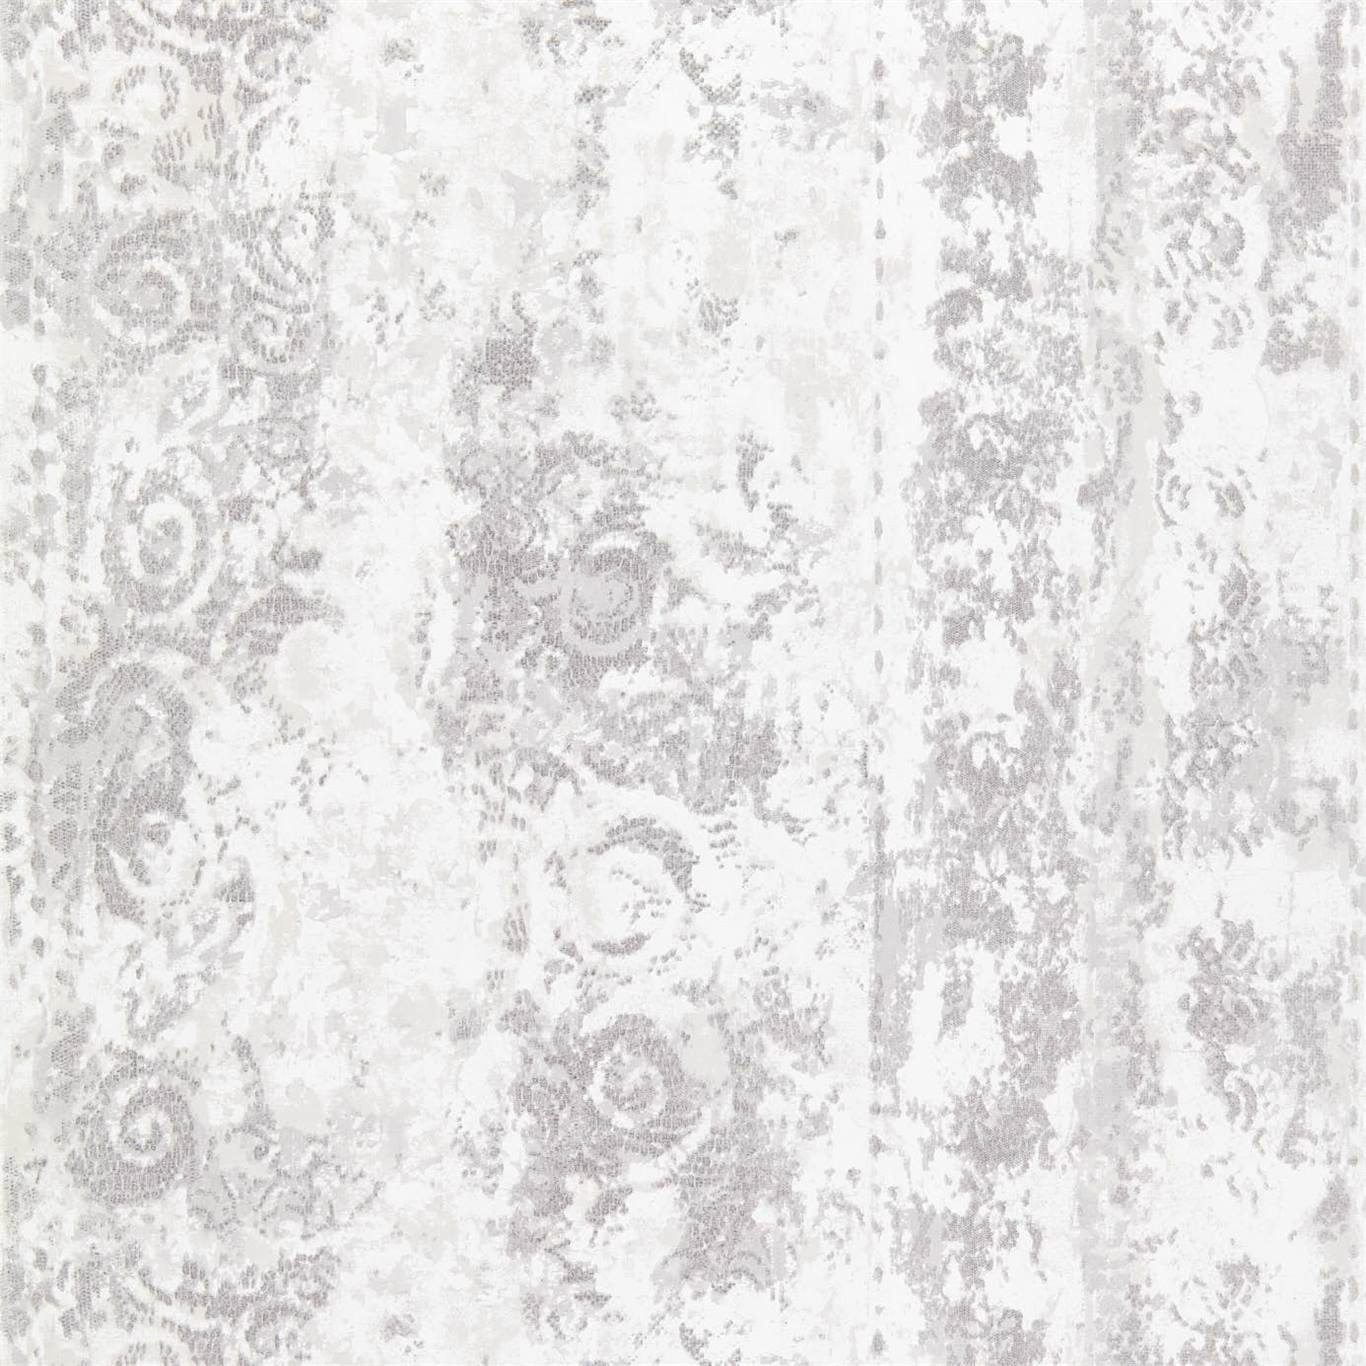 Pozzolana Pumice Wallpaper EVIW112029 by Harlequin